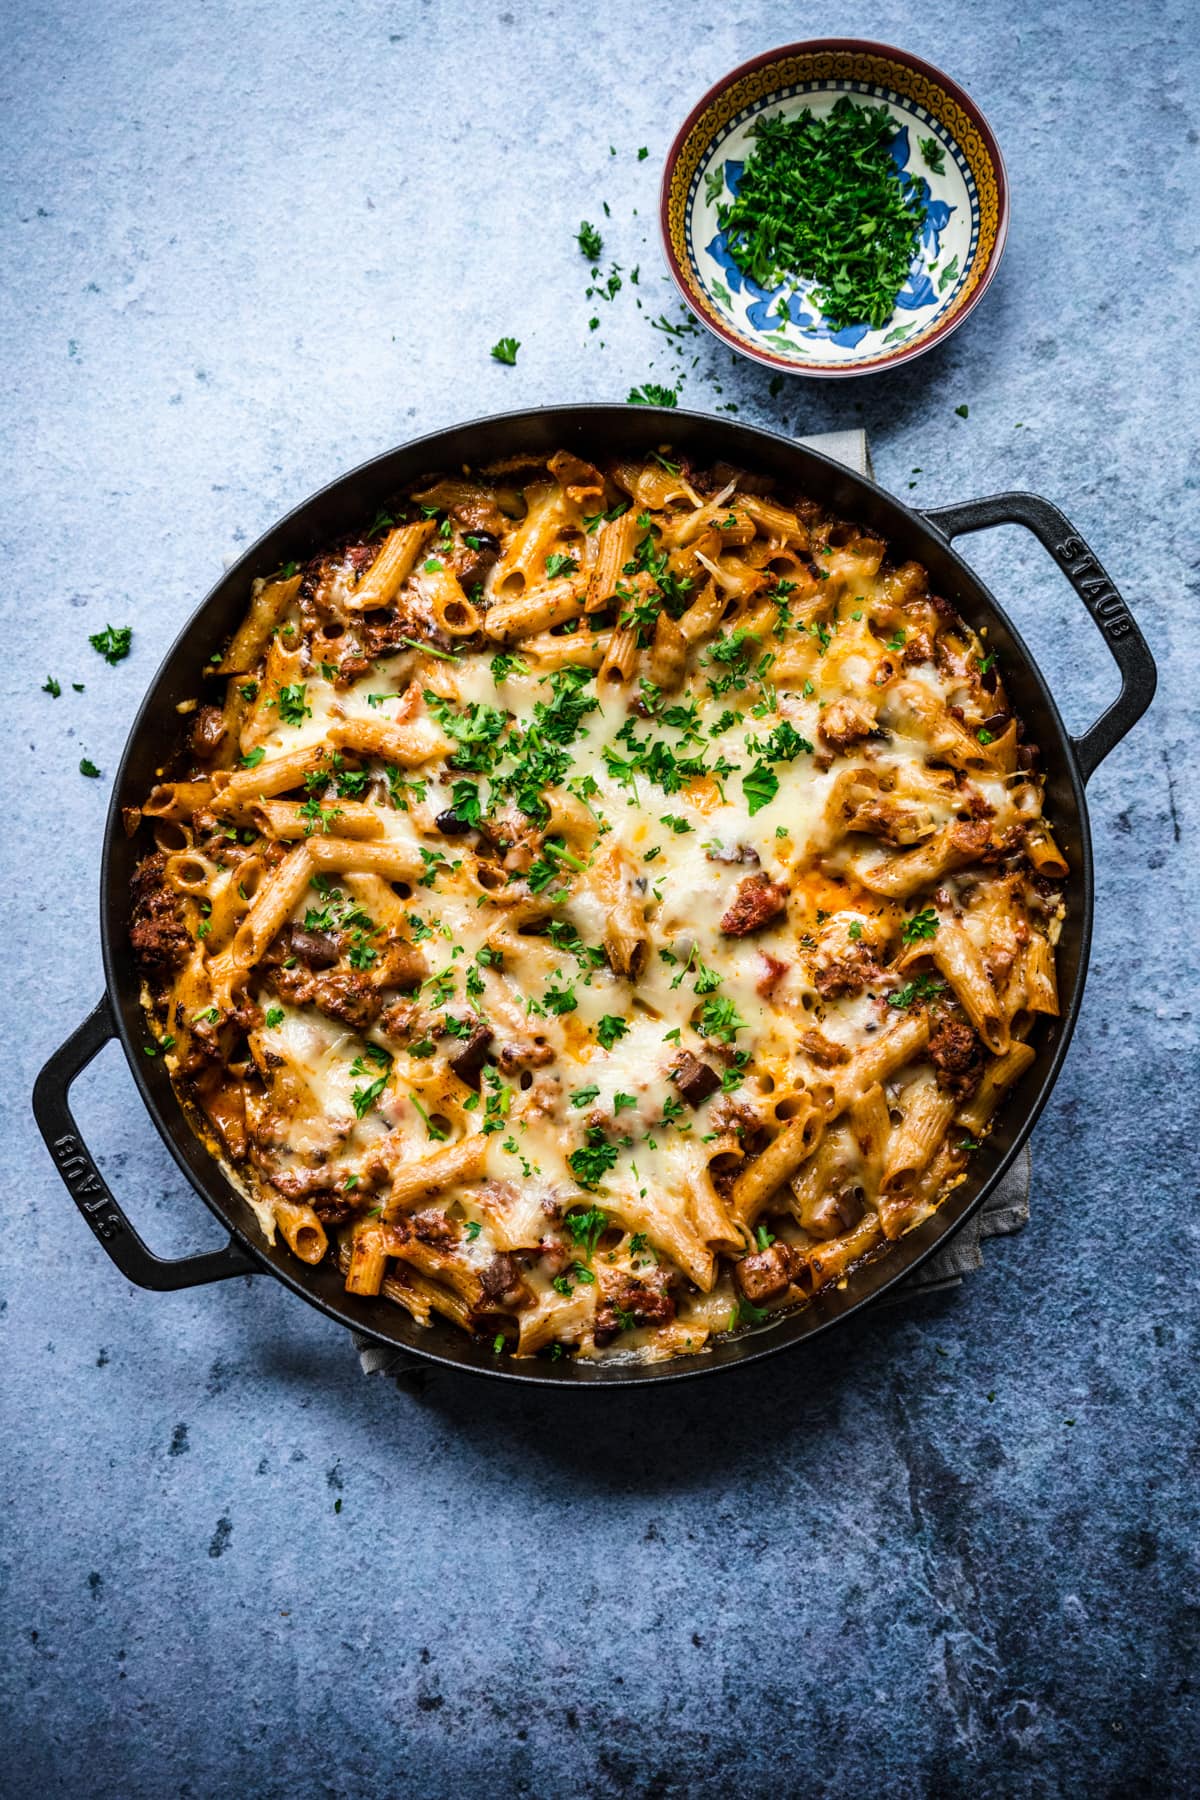 Overhead view of pasta al forno in a cast iron pan garnished with fresh parsley.